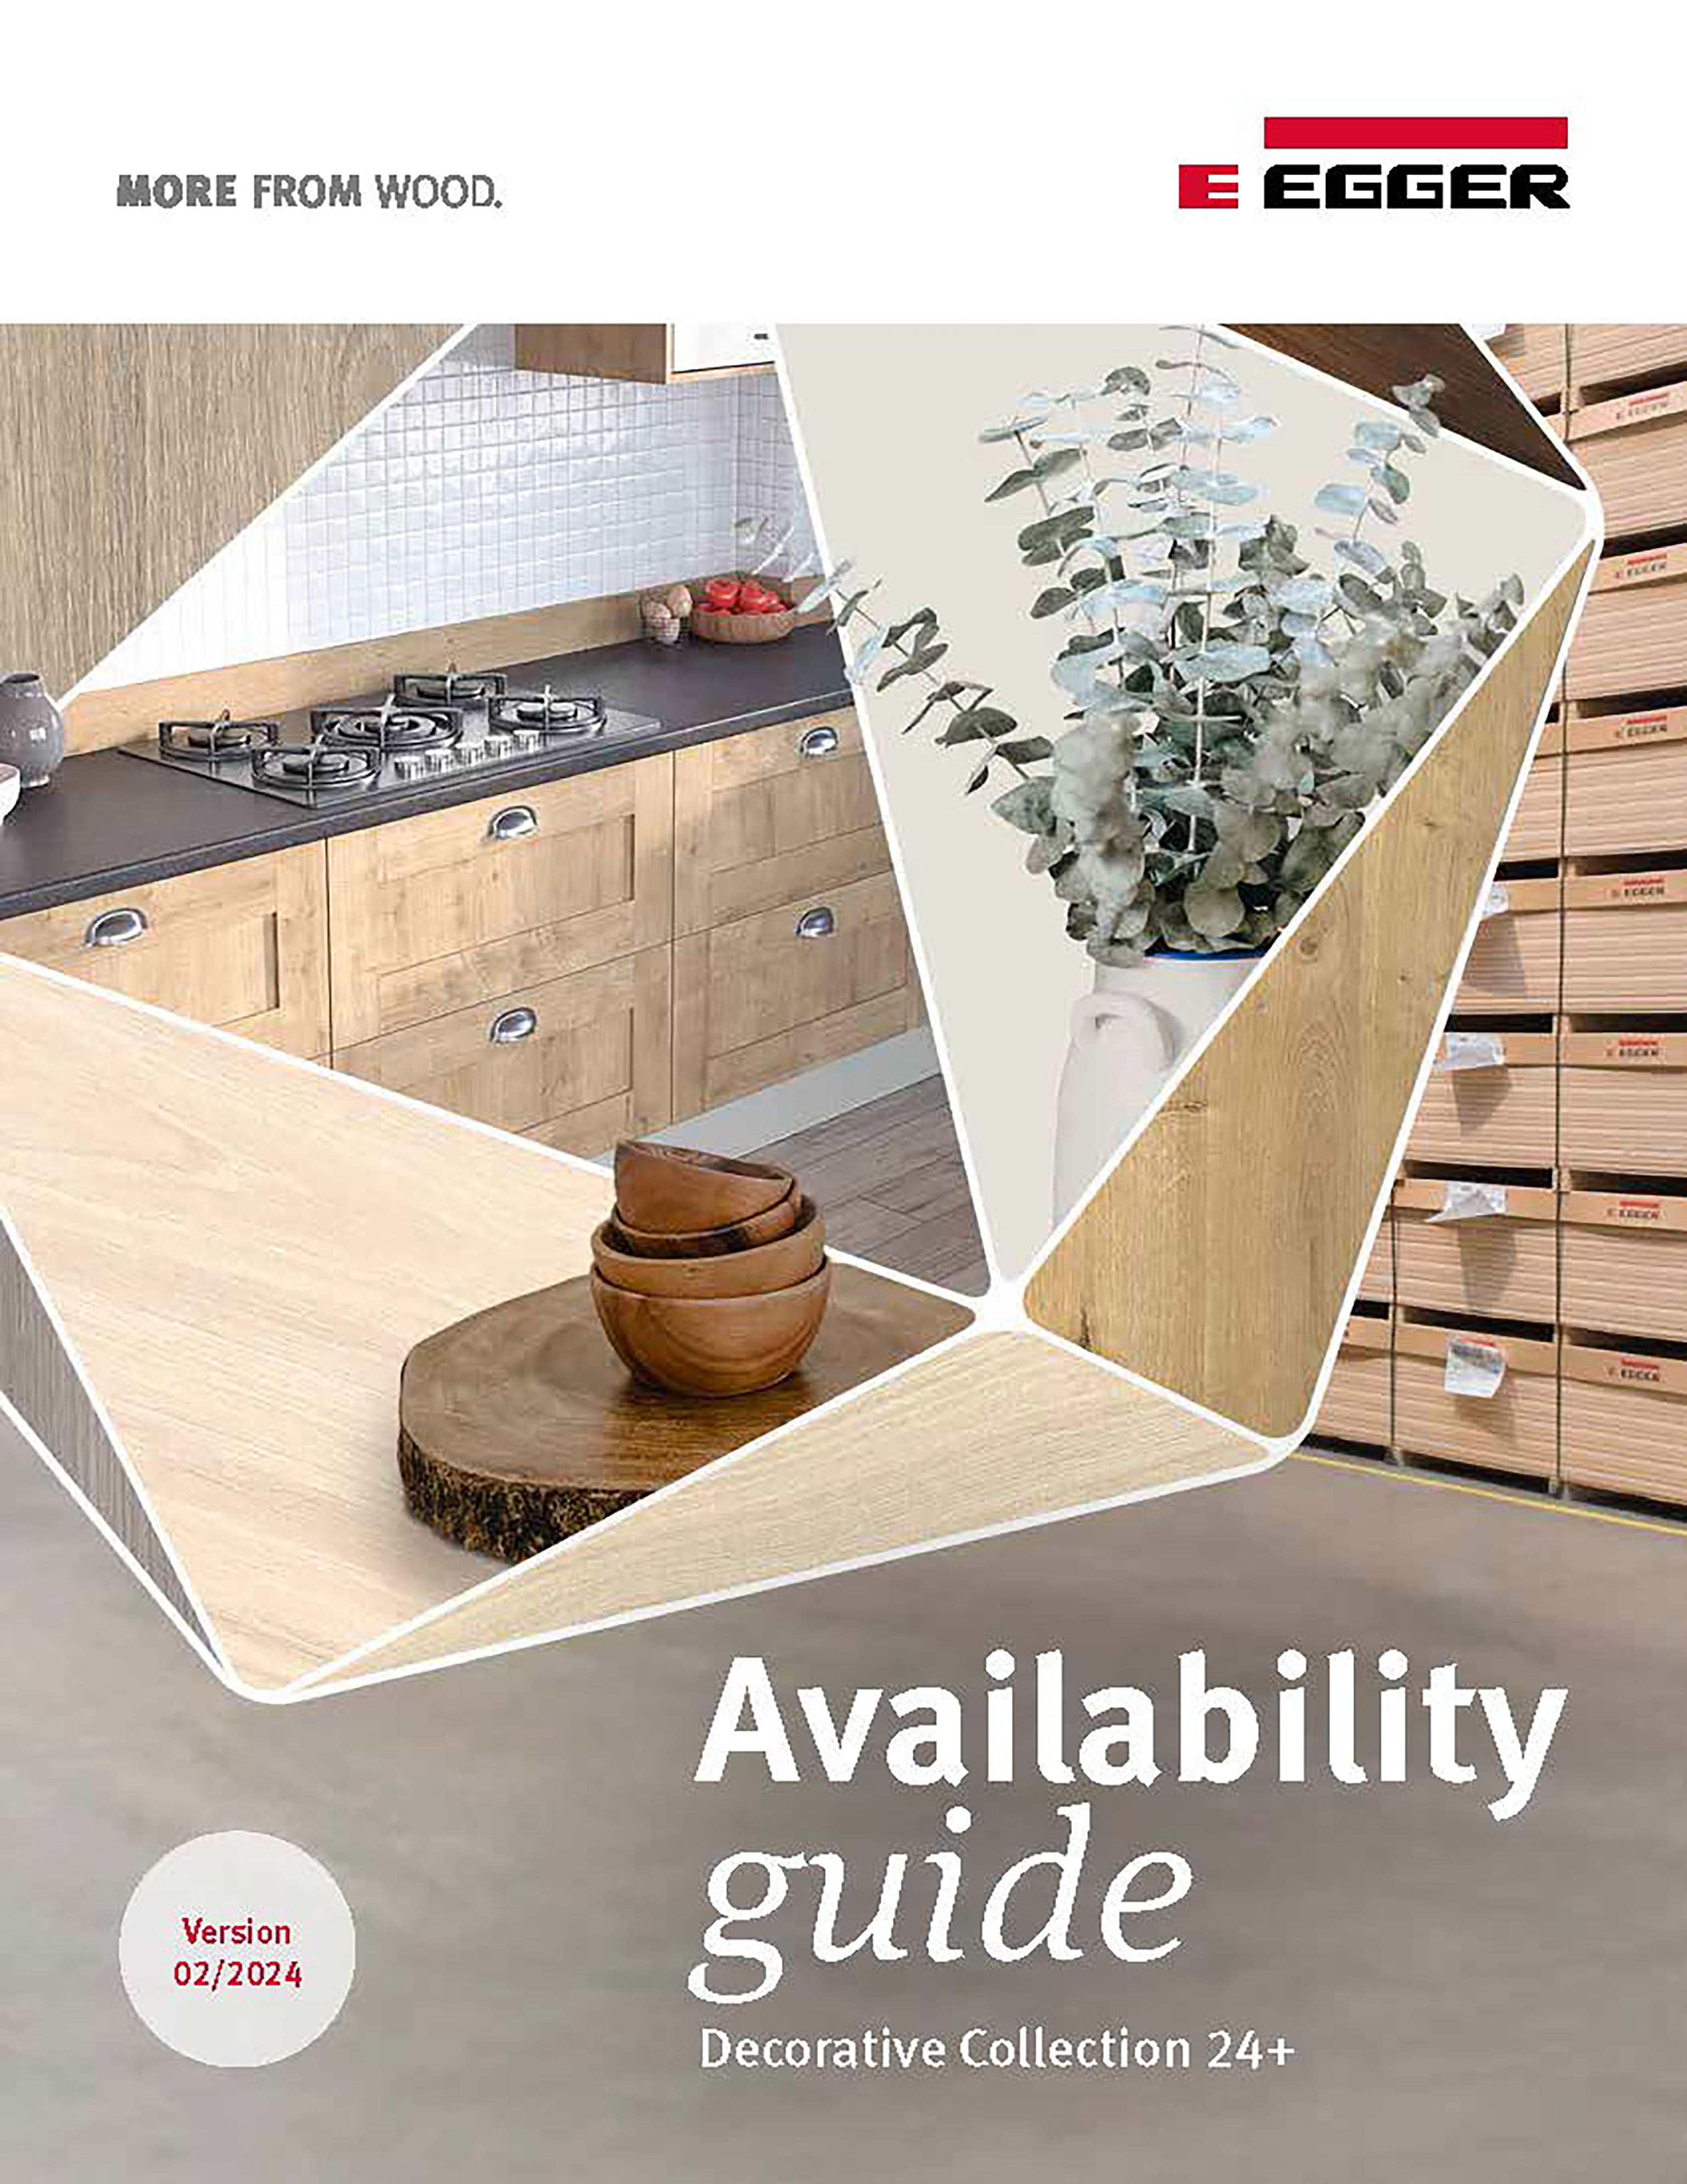 Download the Availability Guide